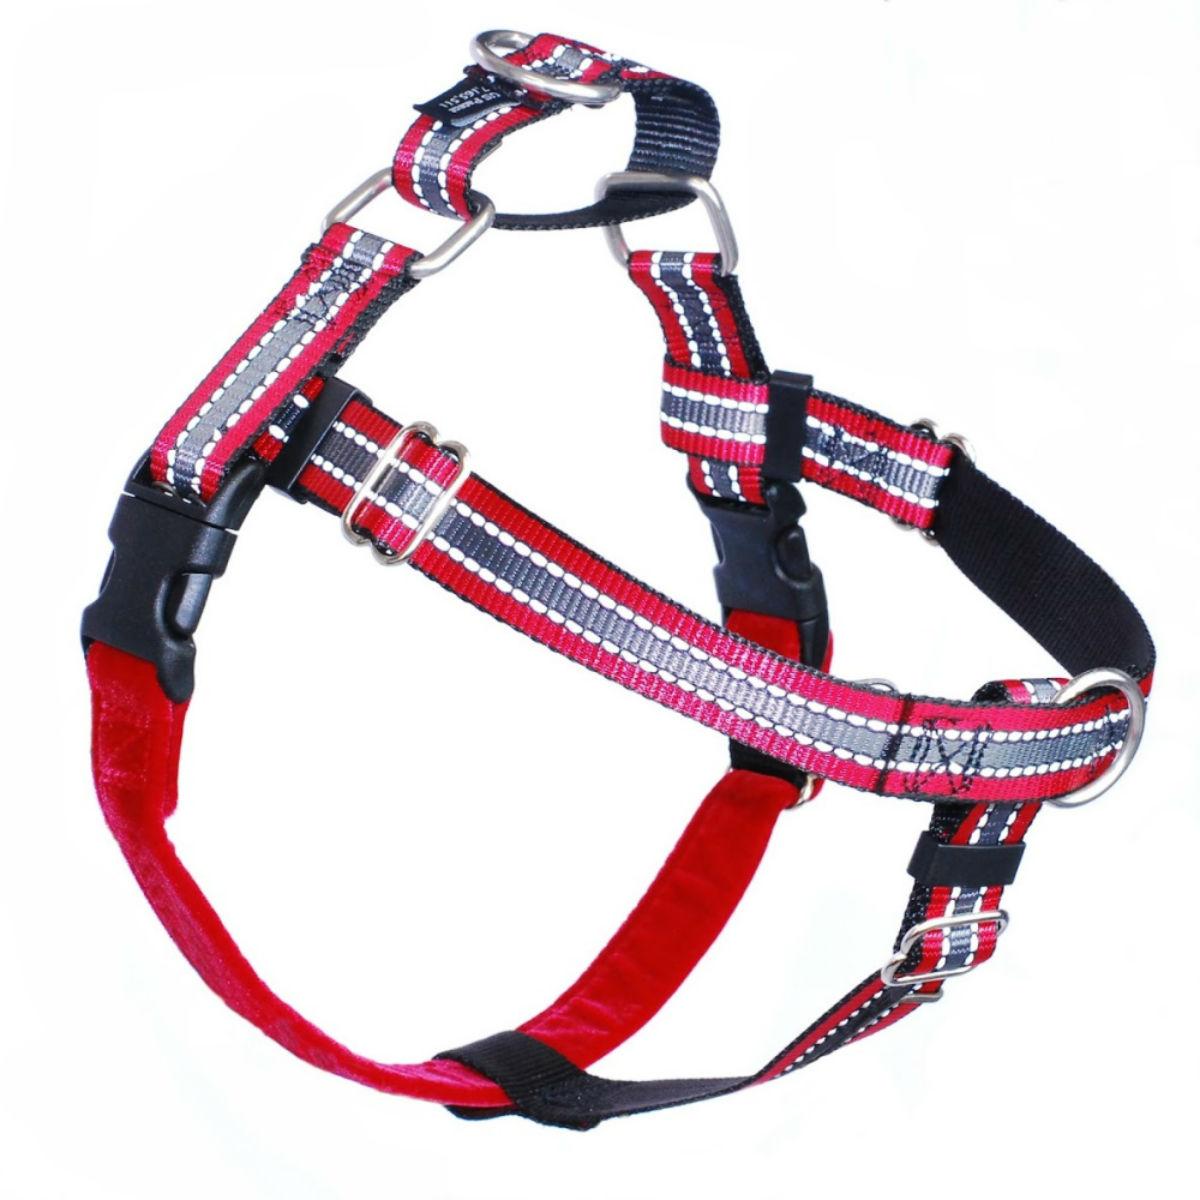 2 Hounds Design No-Pull Dog Harness Deluxe Training Package - Red Reflective